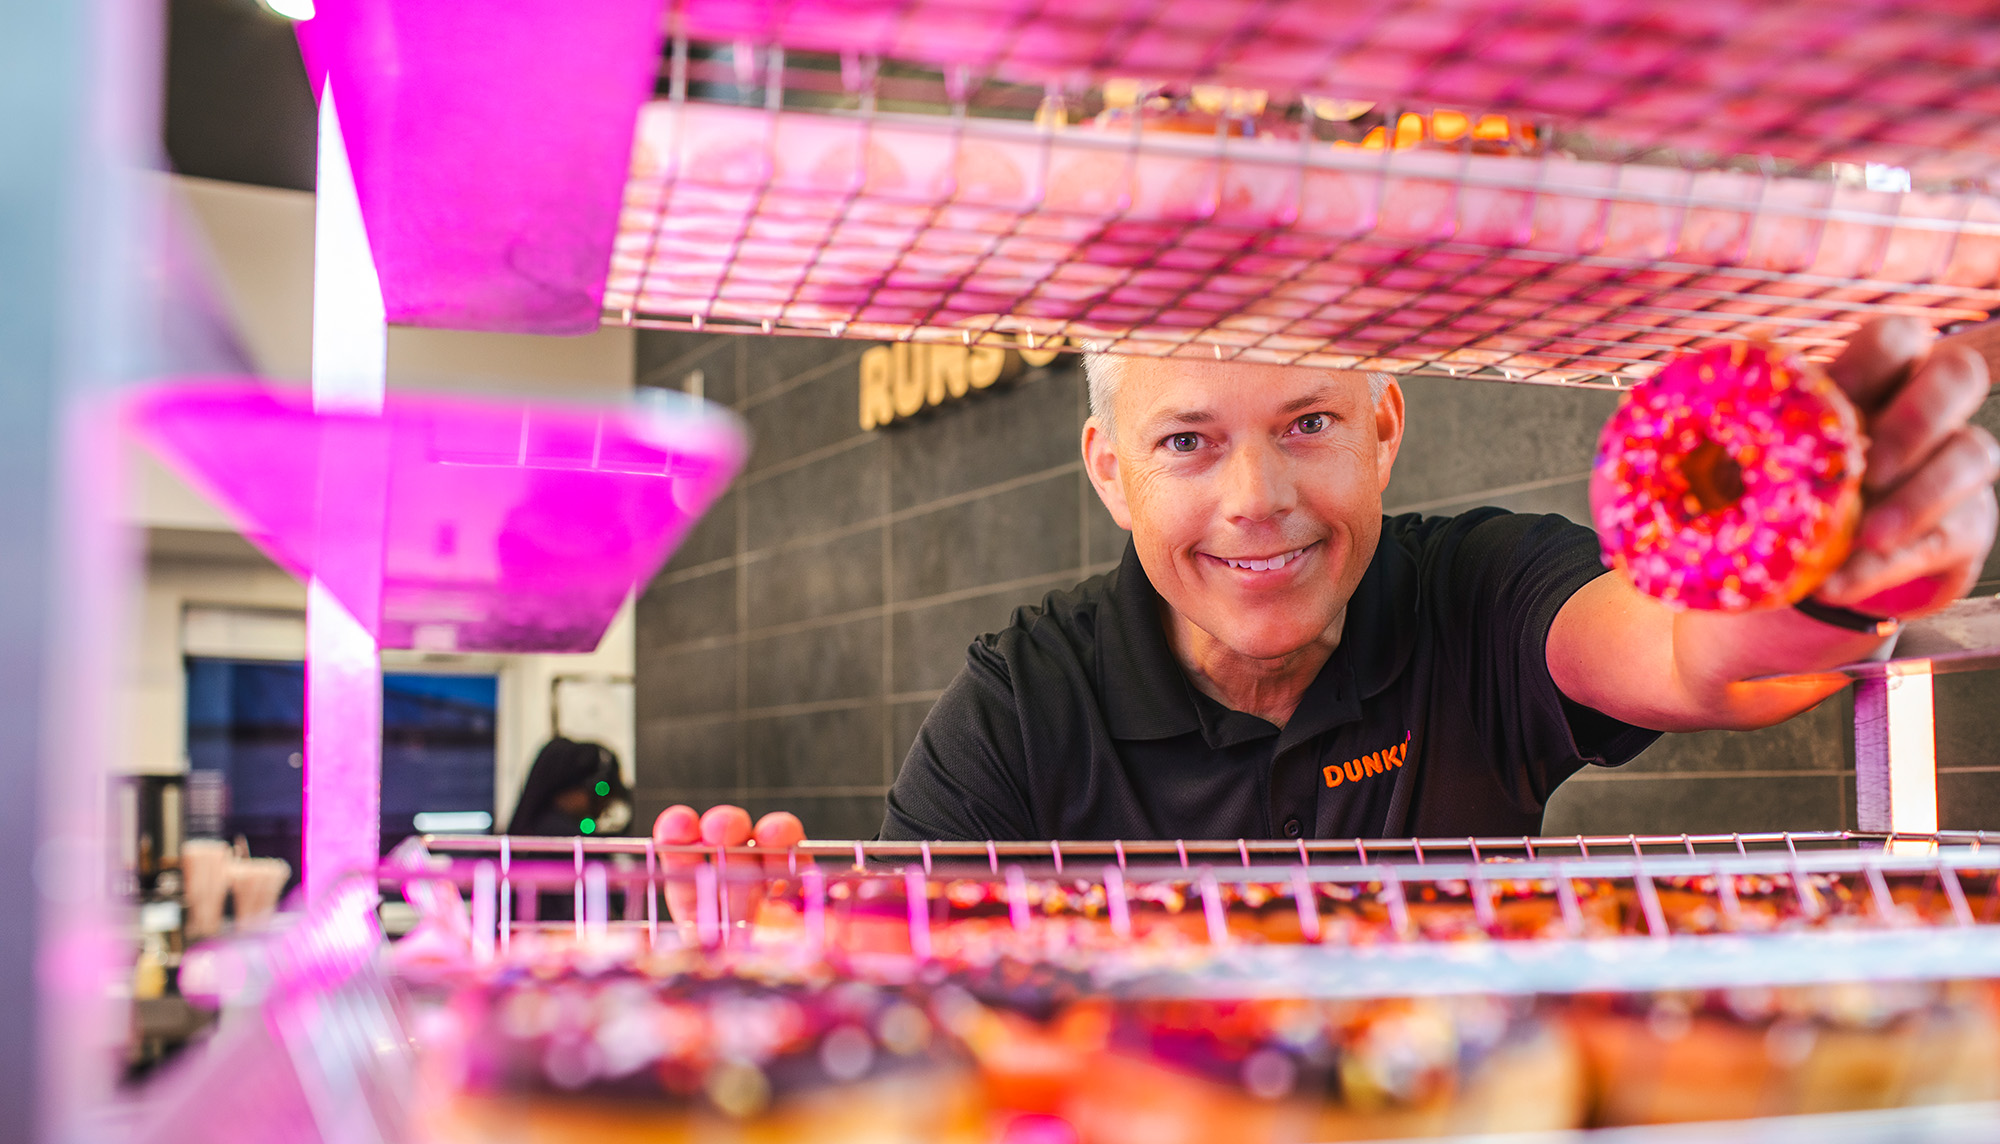 A man looking through a colorful, brightly lit case of donuts